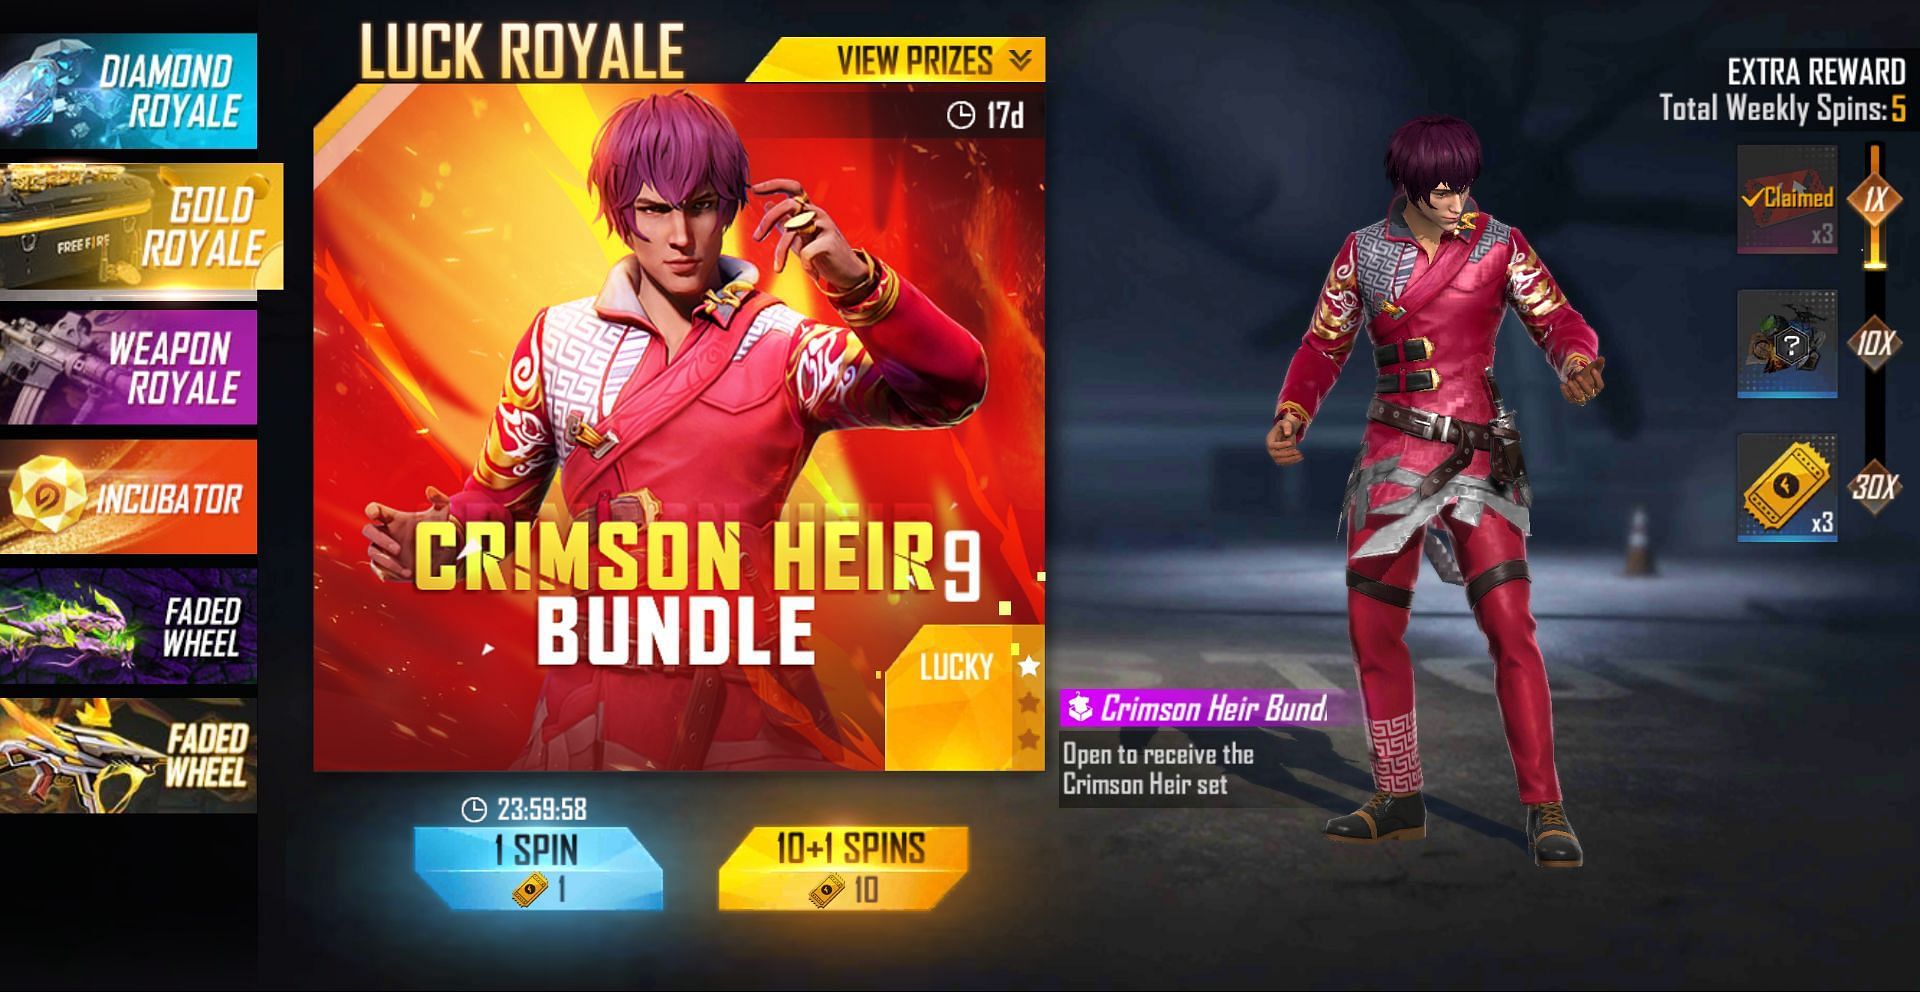 Gold Royale will be ending on 1 December as well (Image via Free Fire)